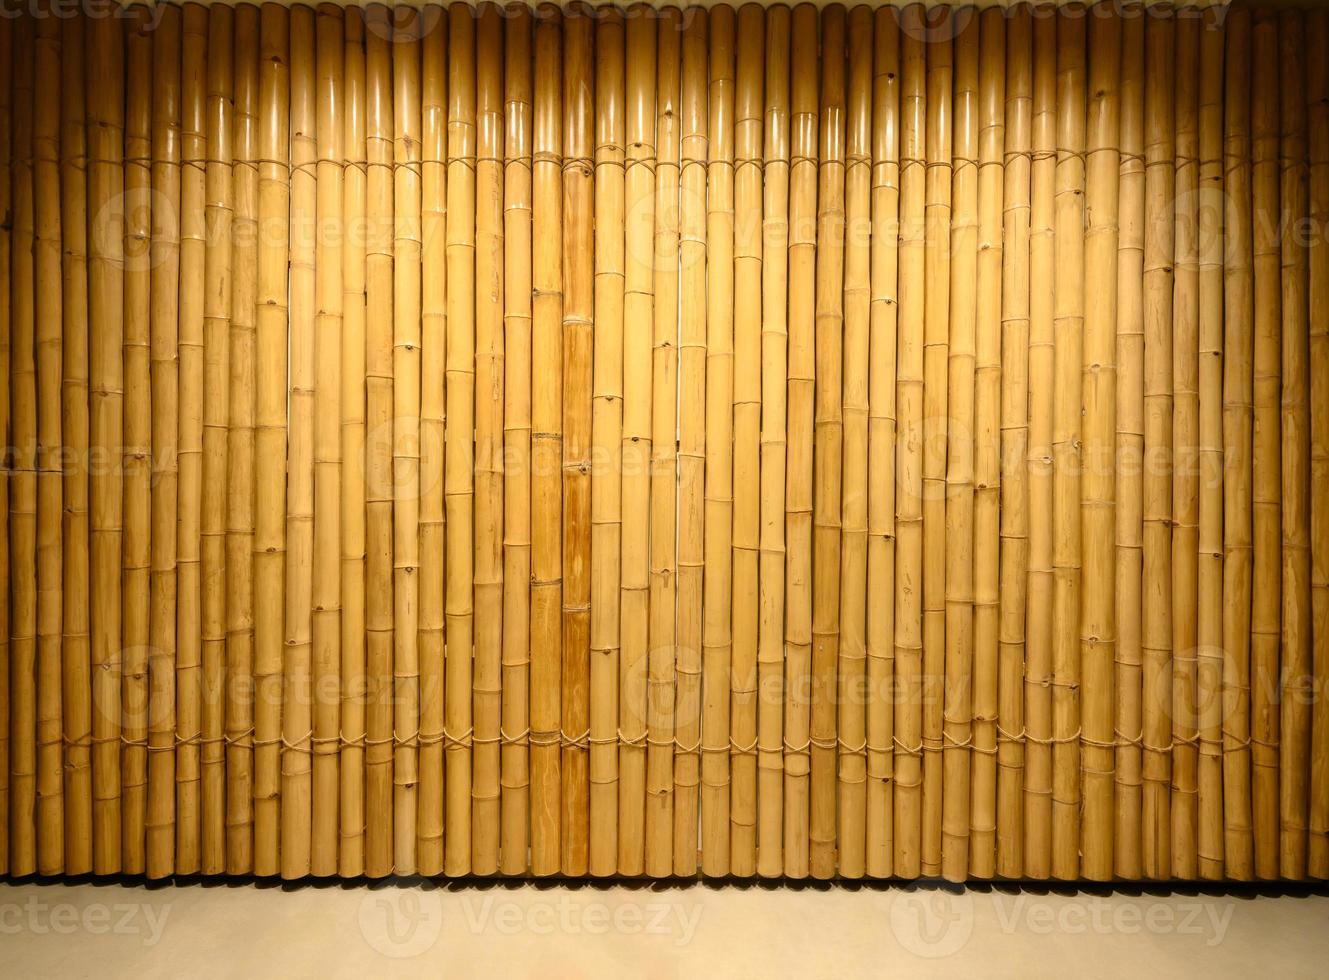 background and texture of decorative yellow bamboo wood on finishing wall surface. photo